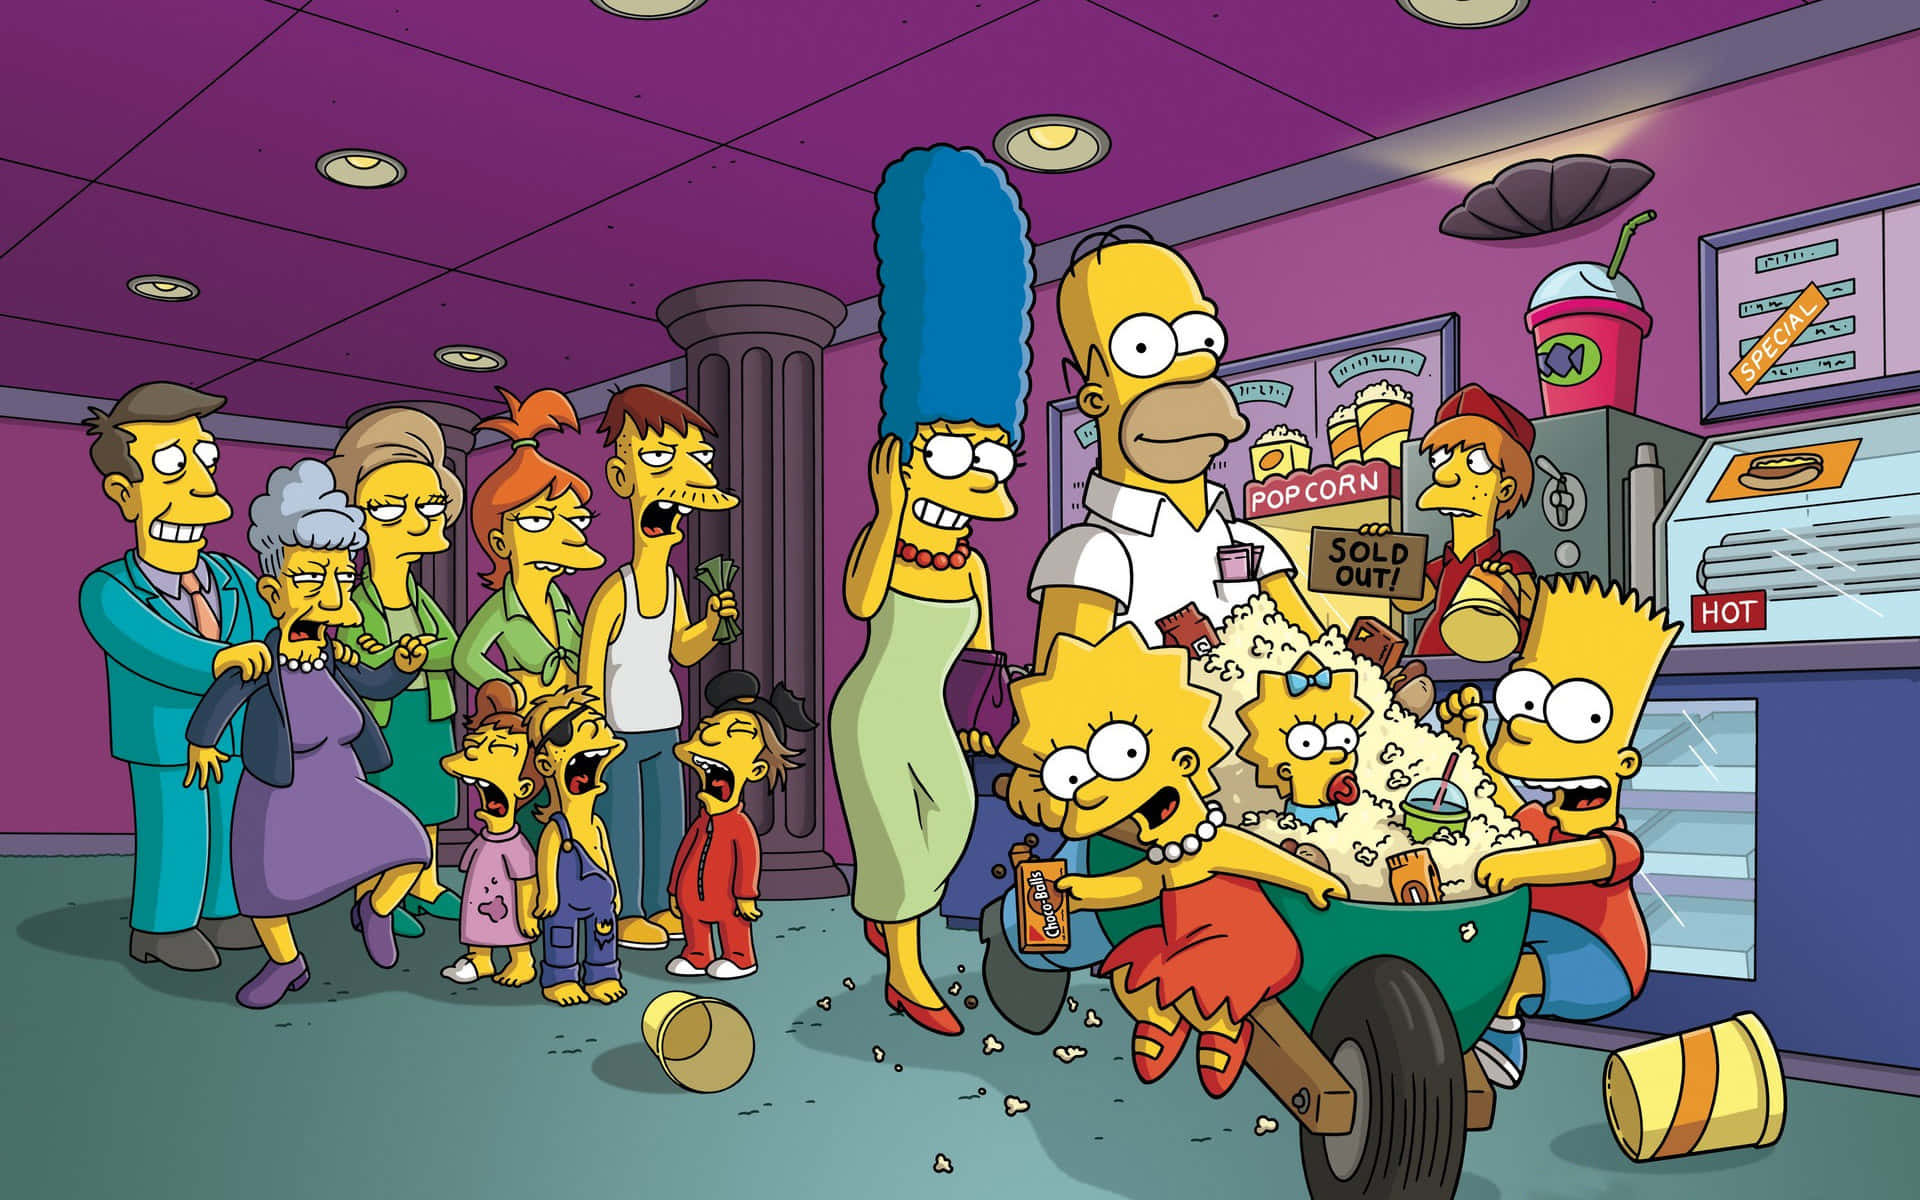 Join the Simpsons for a fun afternoon in the park